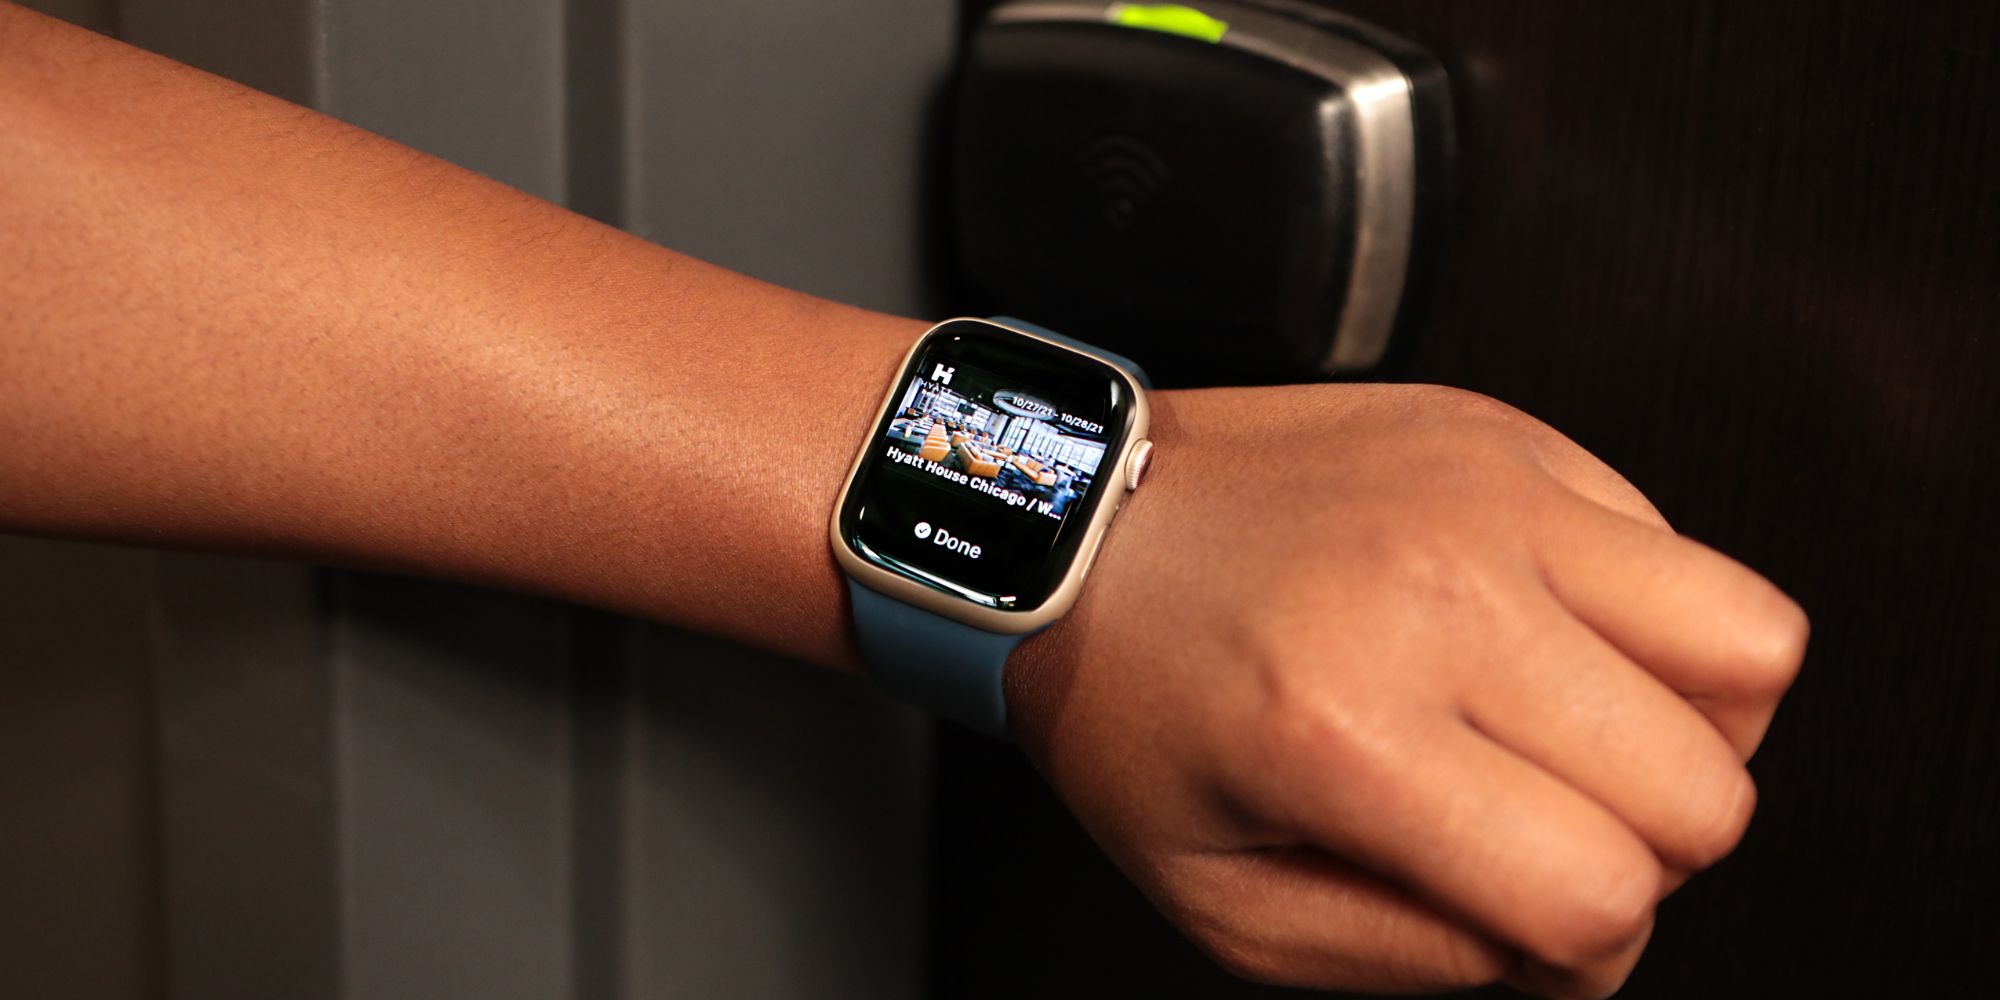 Using an Apple Watch to unlock a hotel room